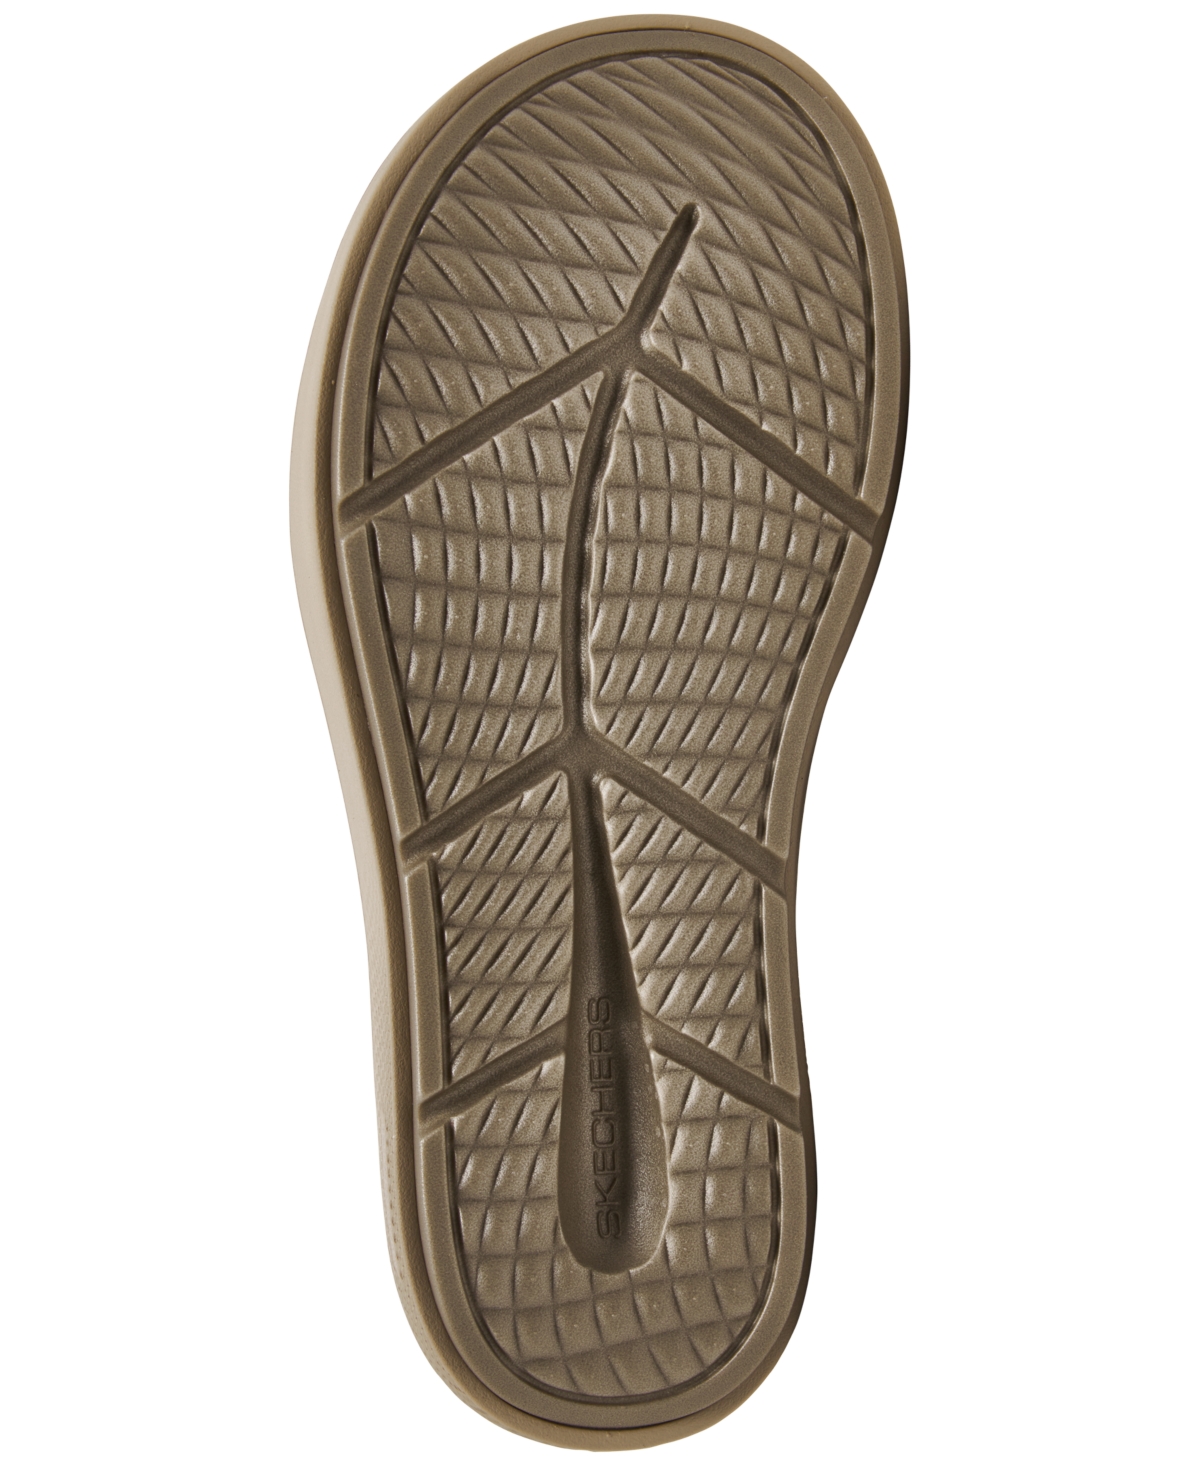 Shop Skechers Women's Go Recover Refresh Slide Sandals From Finish Line In Taupe